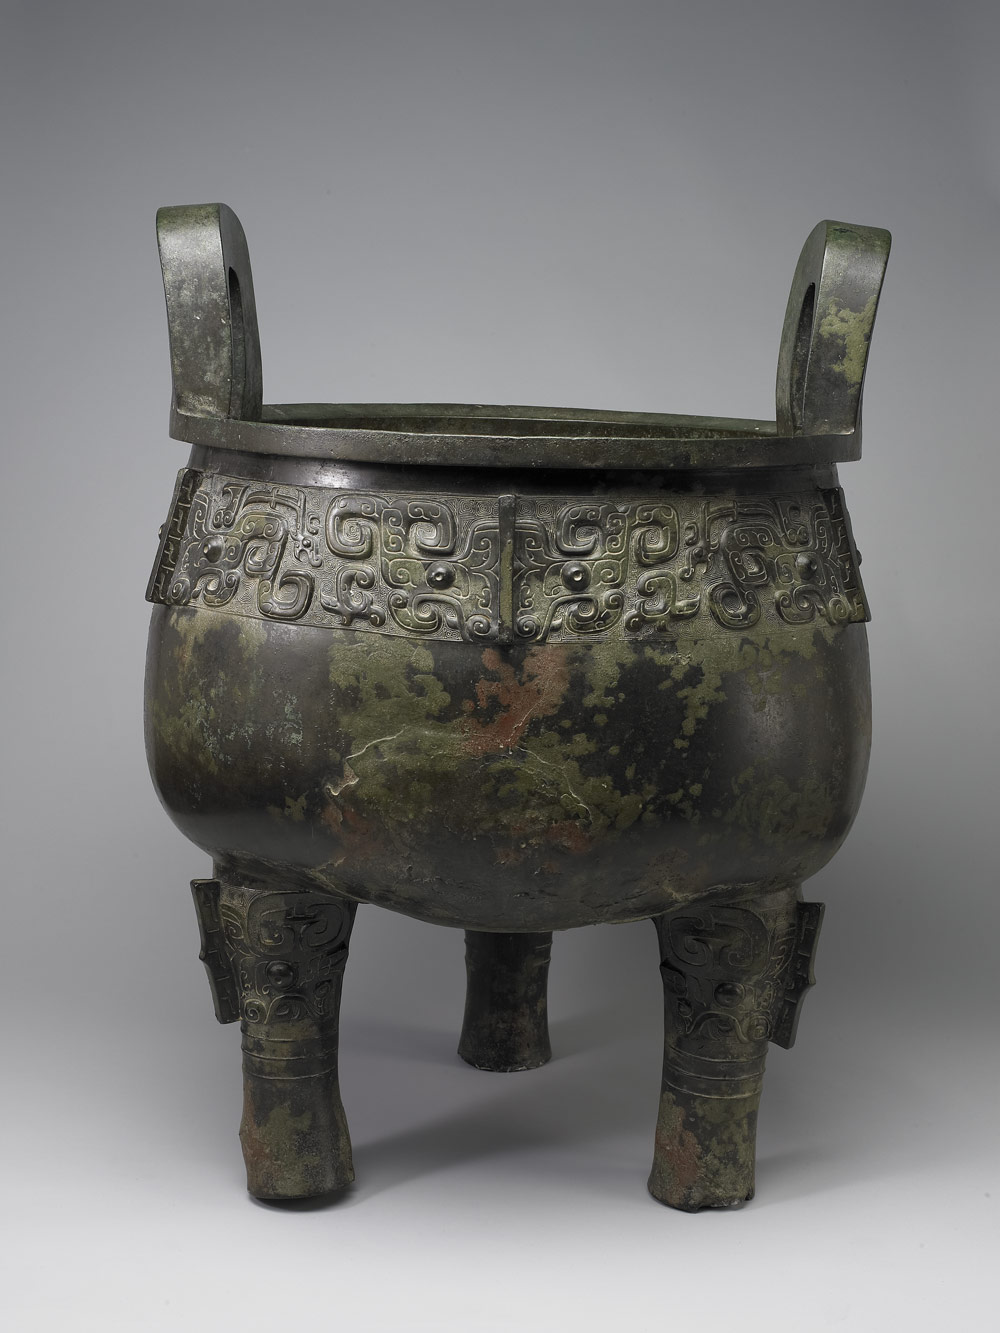 Ding cauldron to Ji from his grandson, Late Shang Dynasty